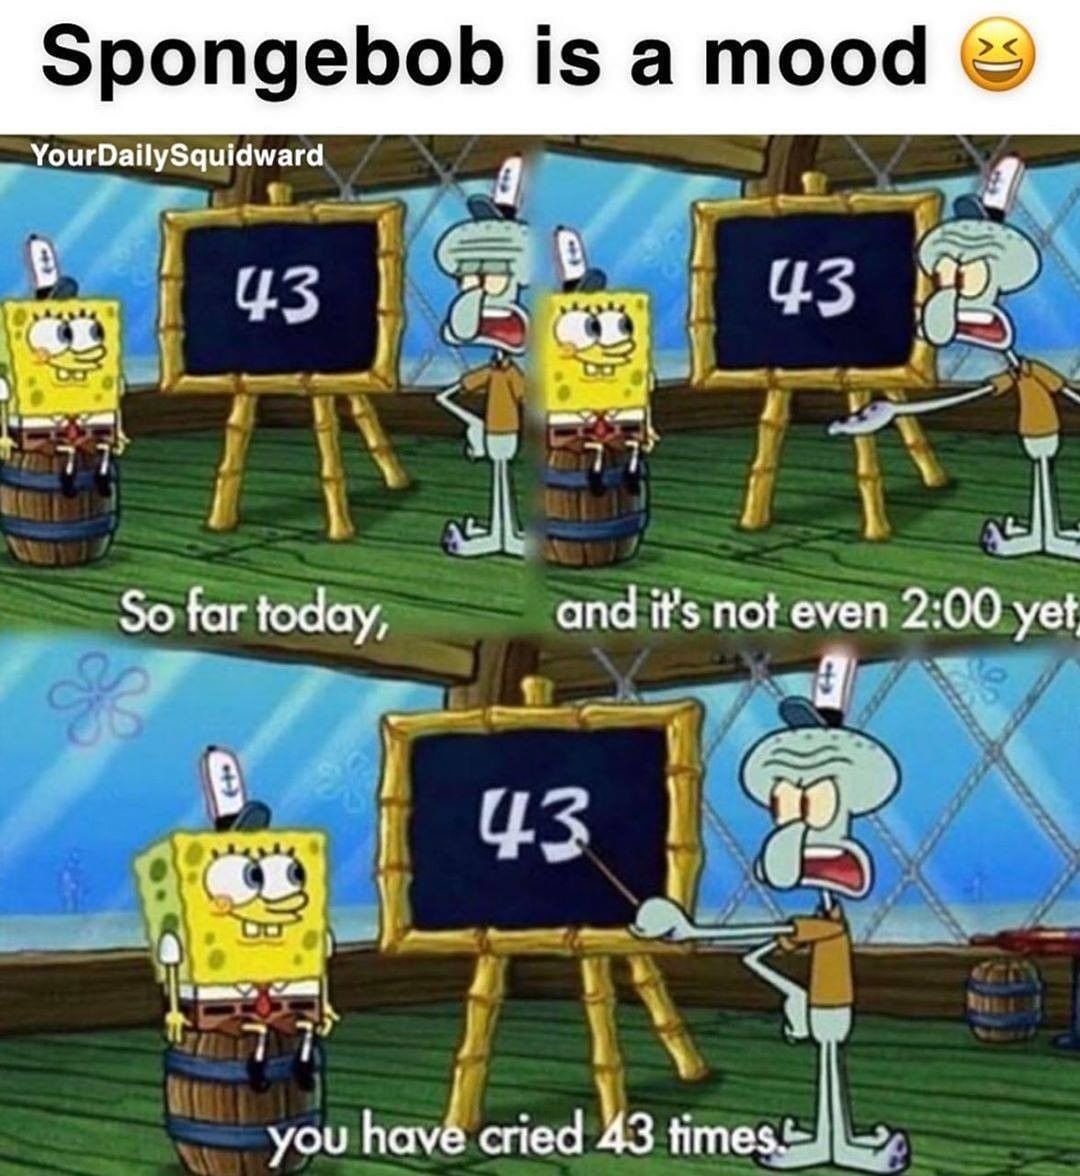 Spongebob is a mood.  So far today, and it's not even 2:00 yet you have cried 43 times.